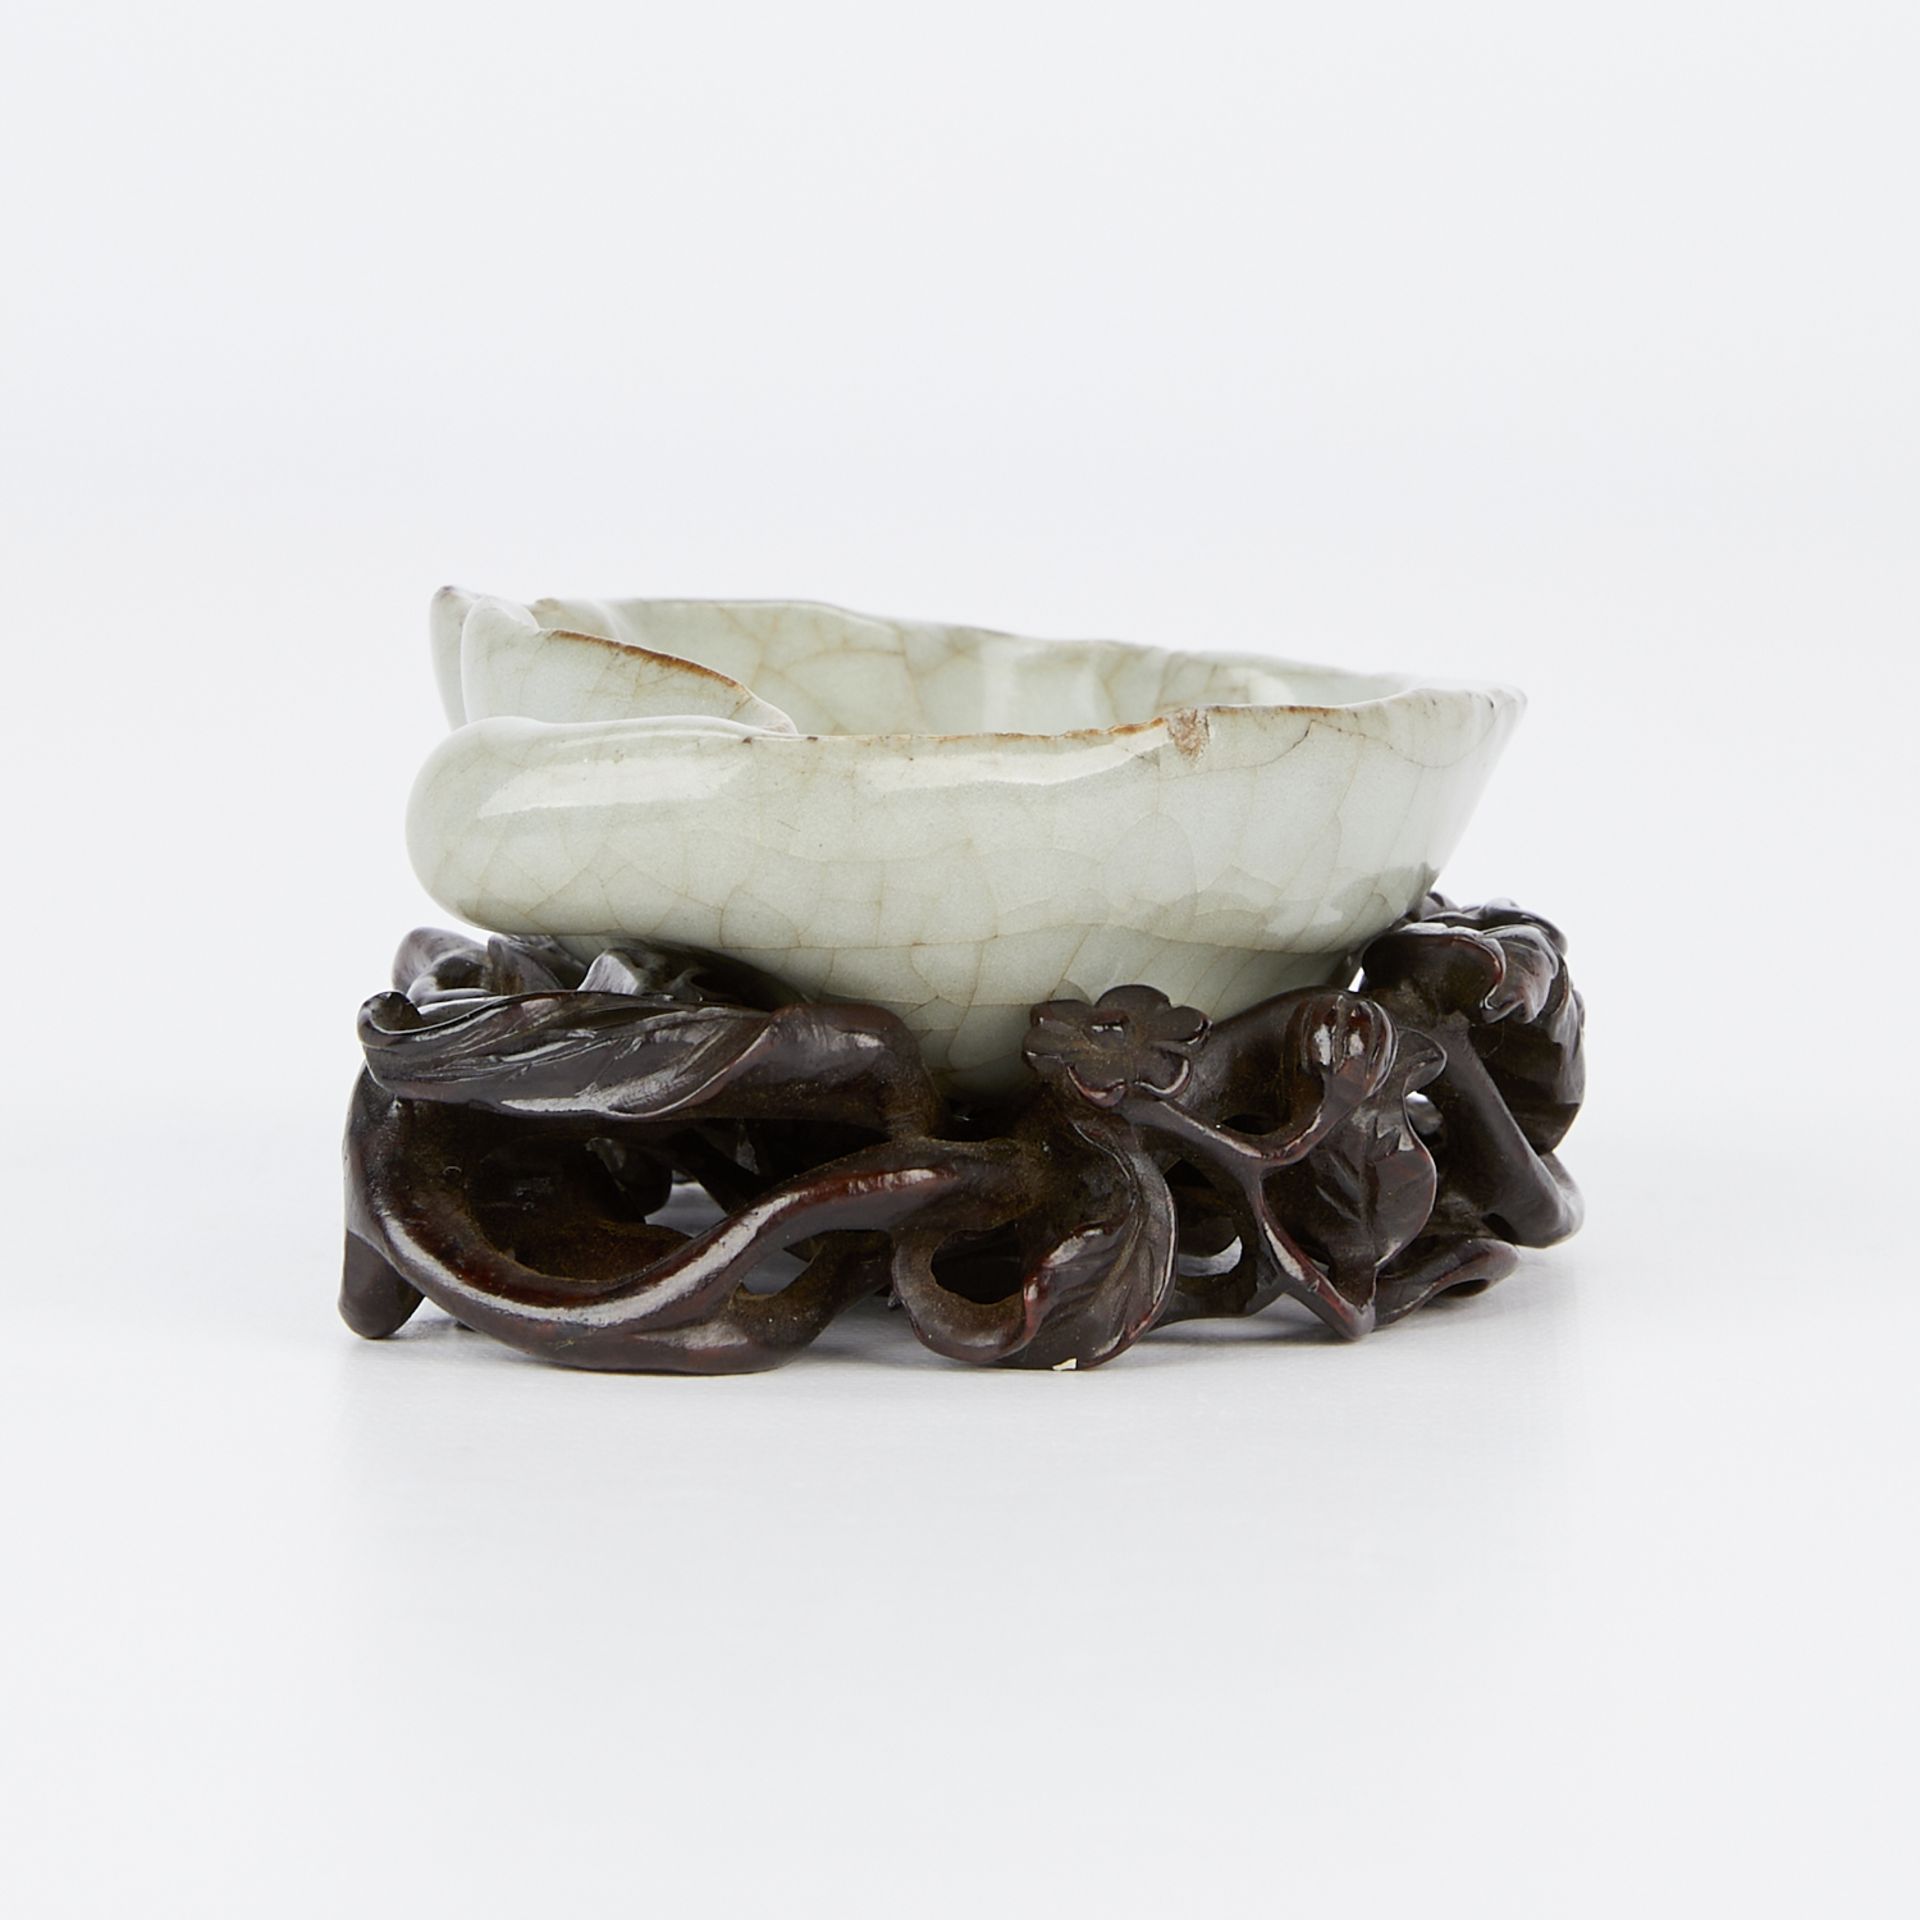 Chinese Ceramic Shell w/ Stand - Image 7 of 11